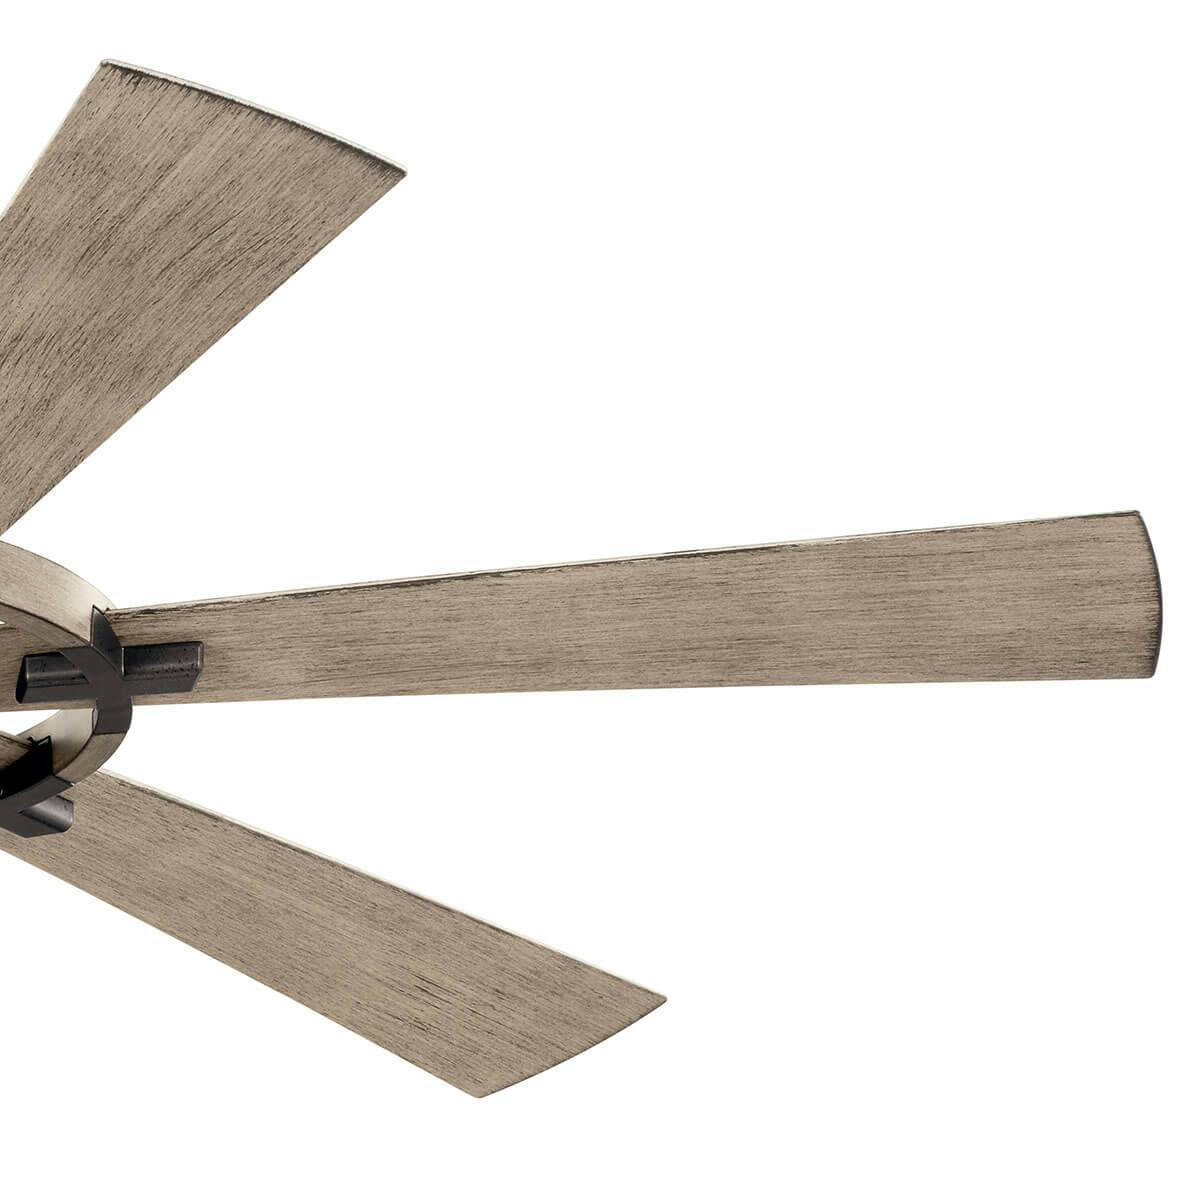 Close up view of the Gentry Lite LED 52" Ceiling Fan Anvil Iron on a white background